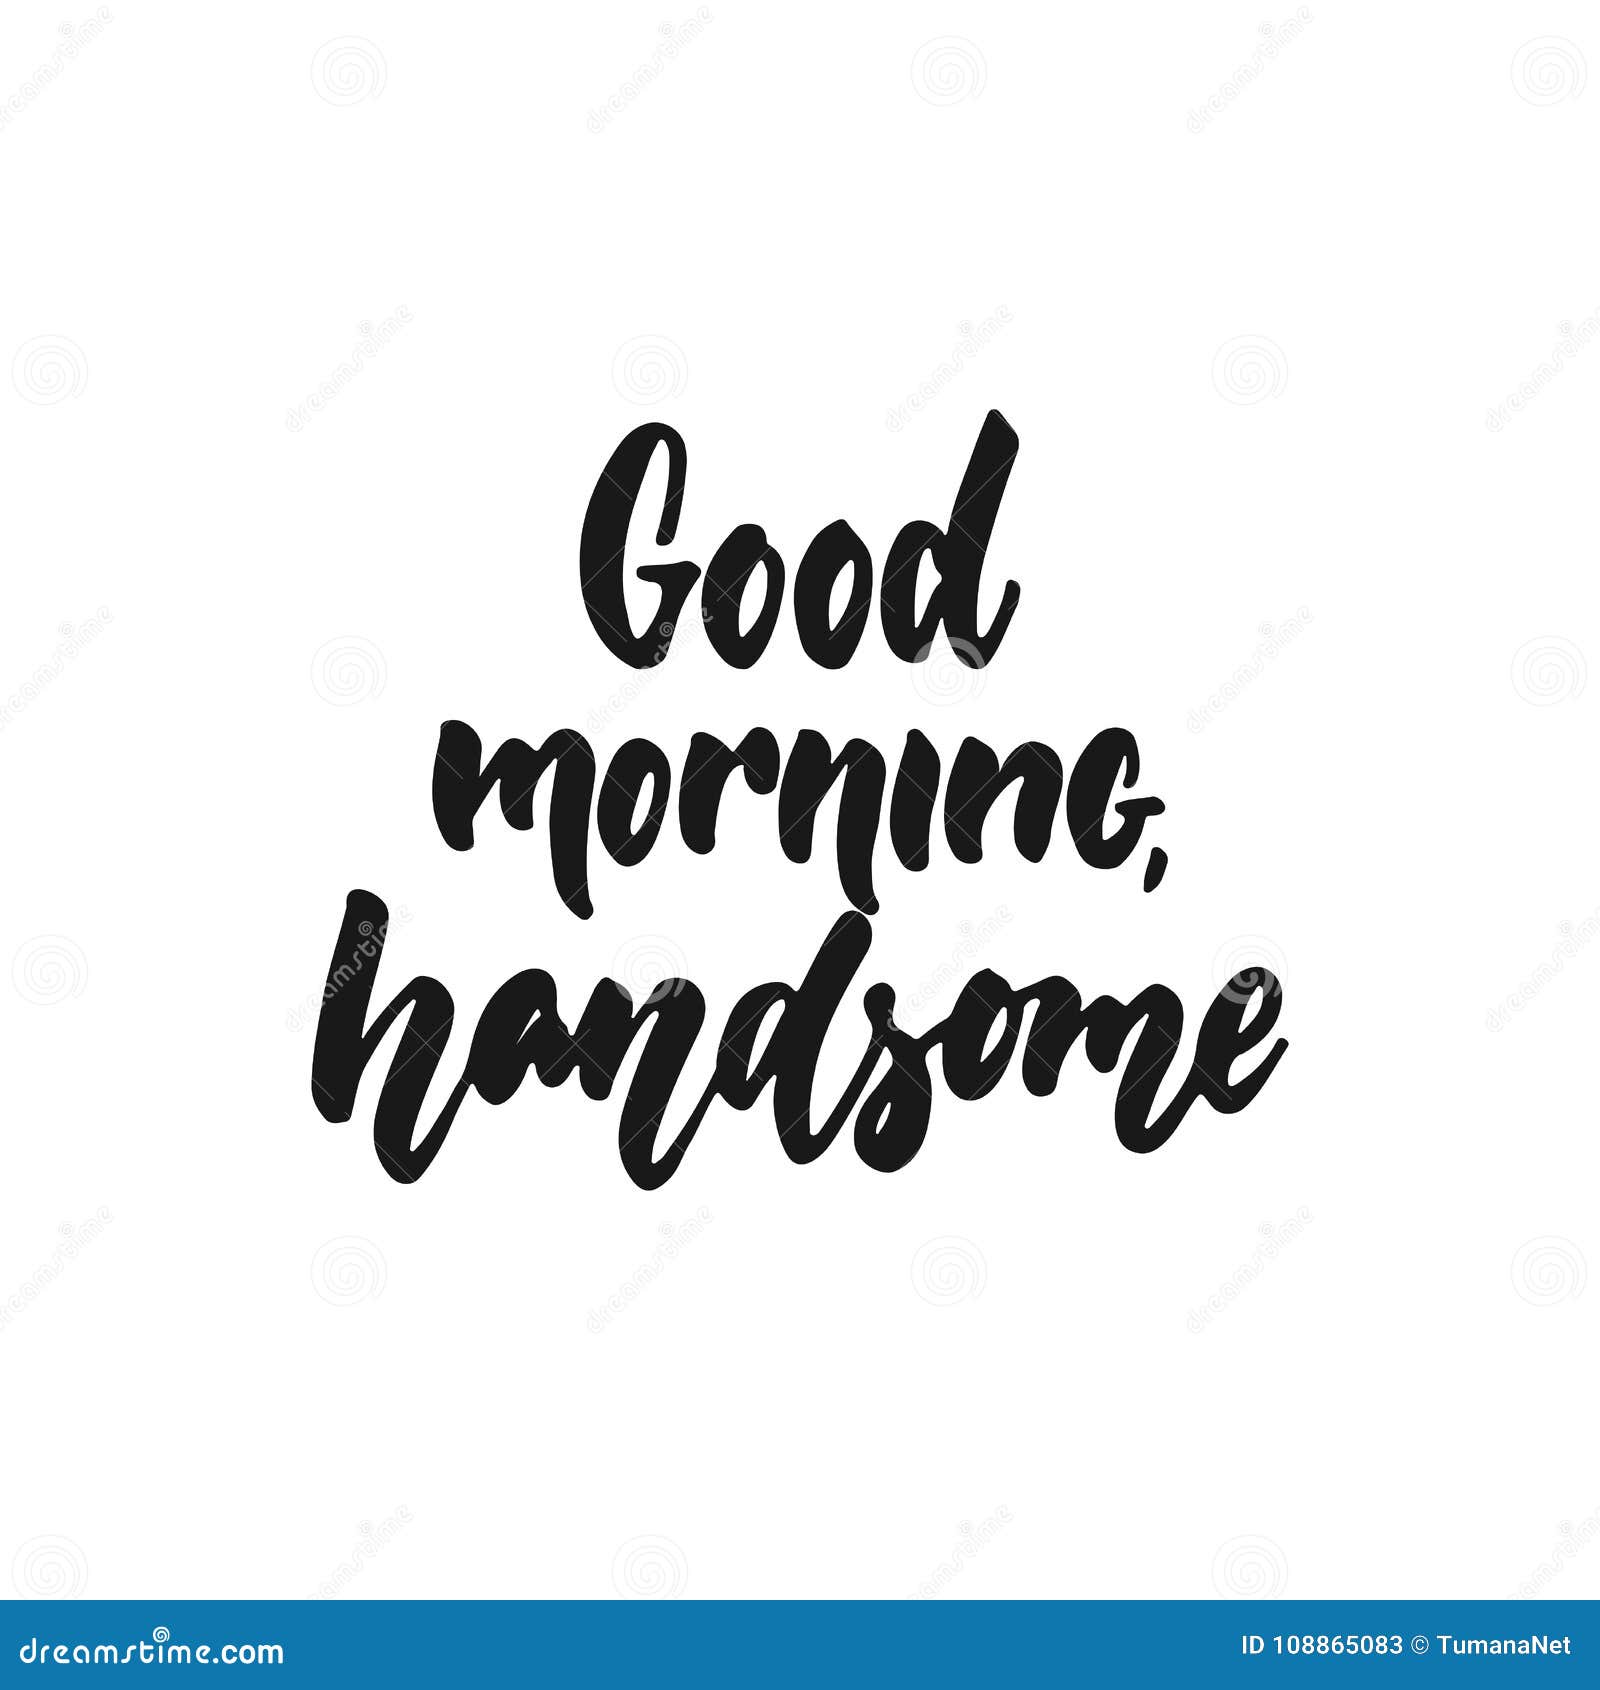 Good Morning, Handsome - Hand Drawn Lettering Phrase Isolated on the ...